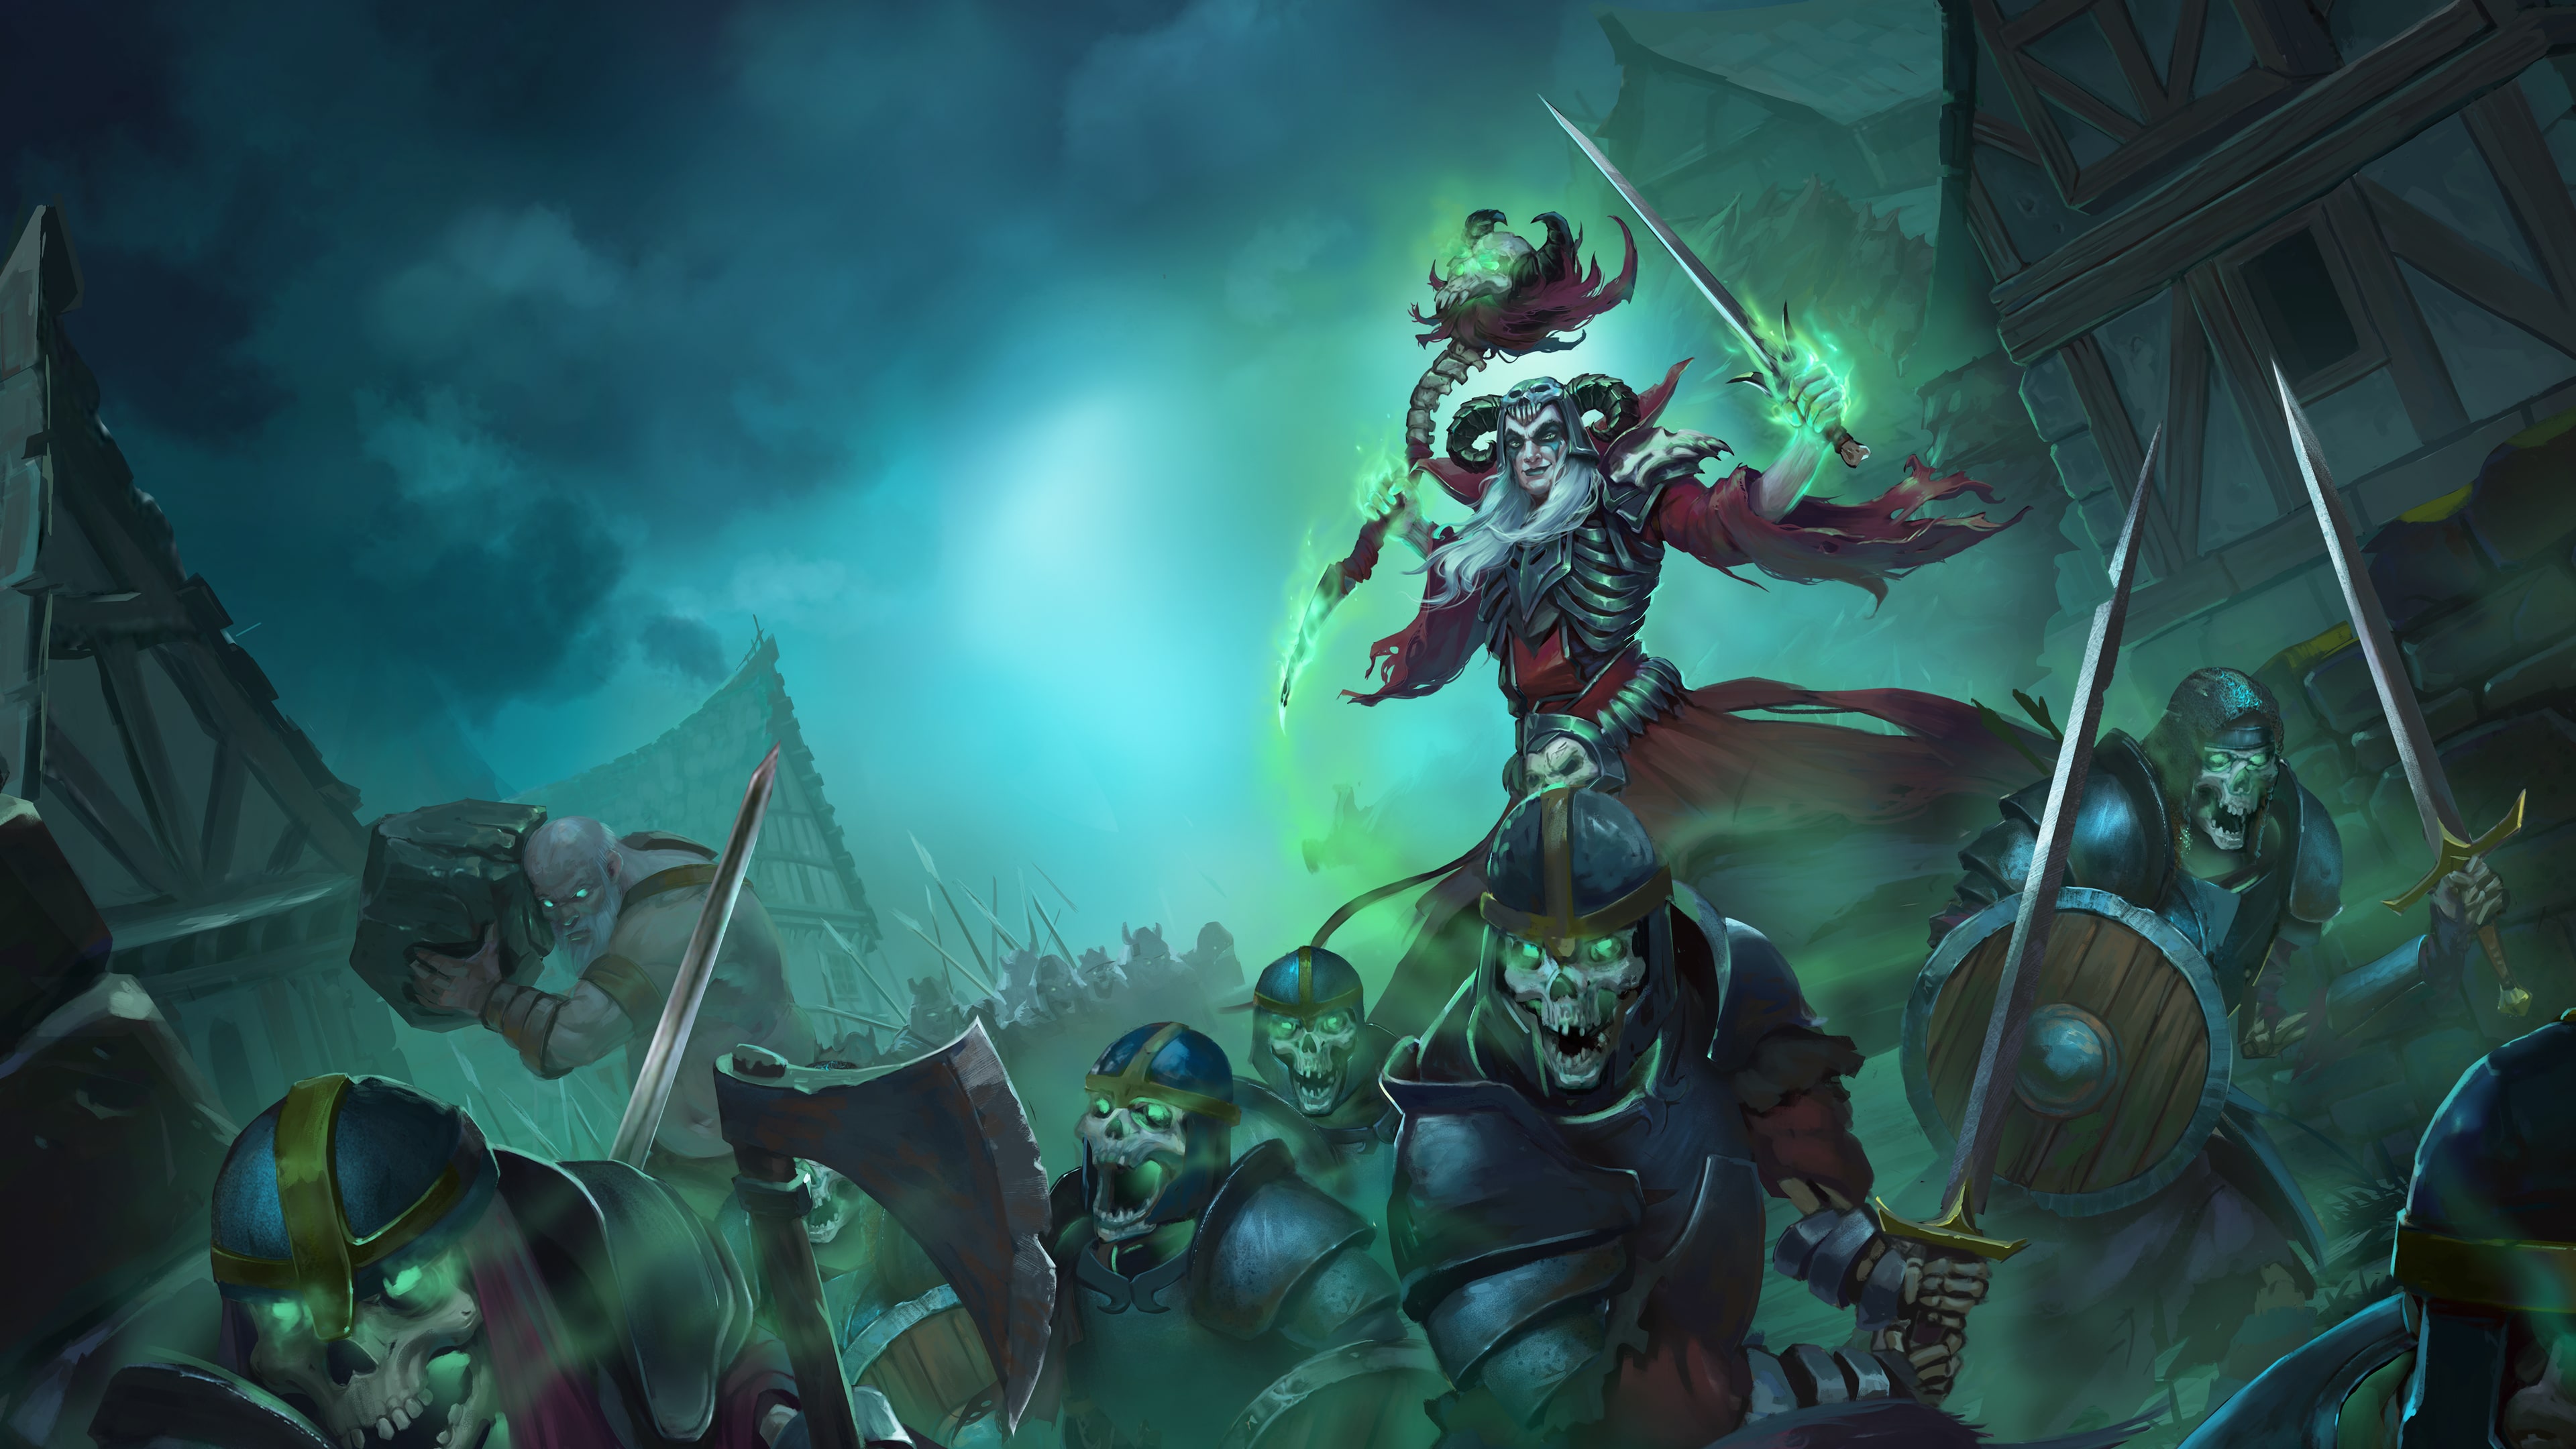 download the new for windows Undead Horde